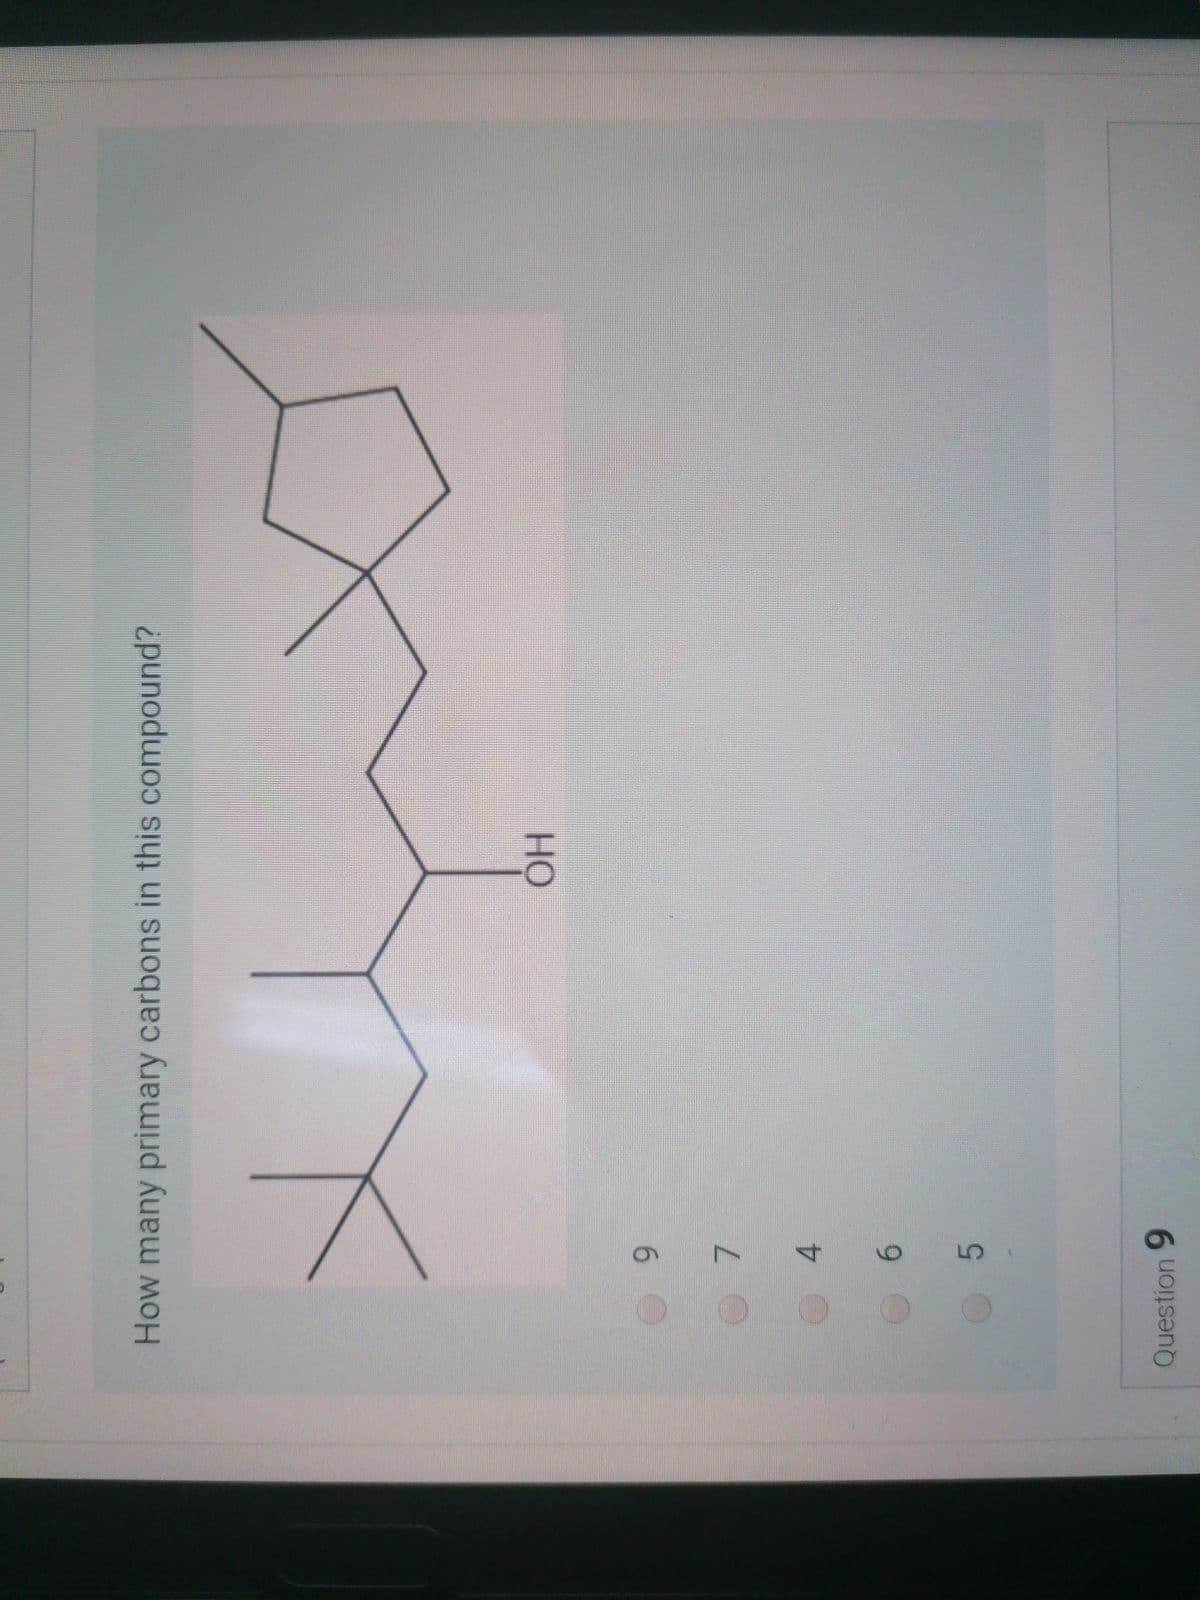 Question 9
5.
6.
4.
6
но
How many primary carbons in this compound?
